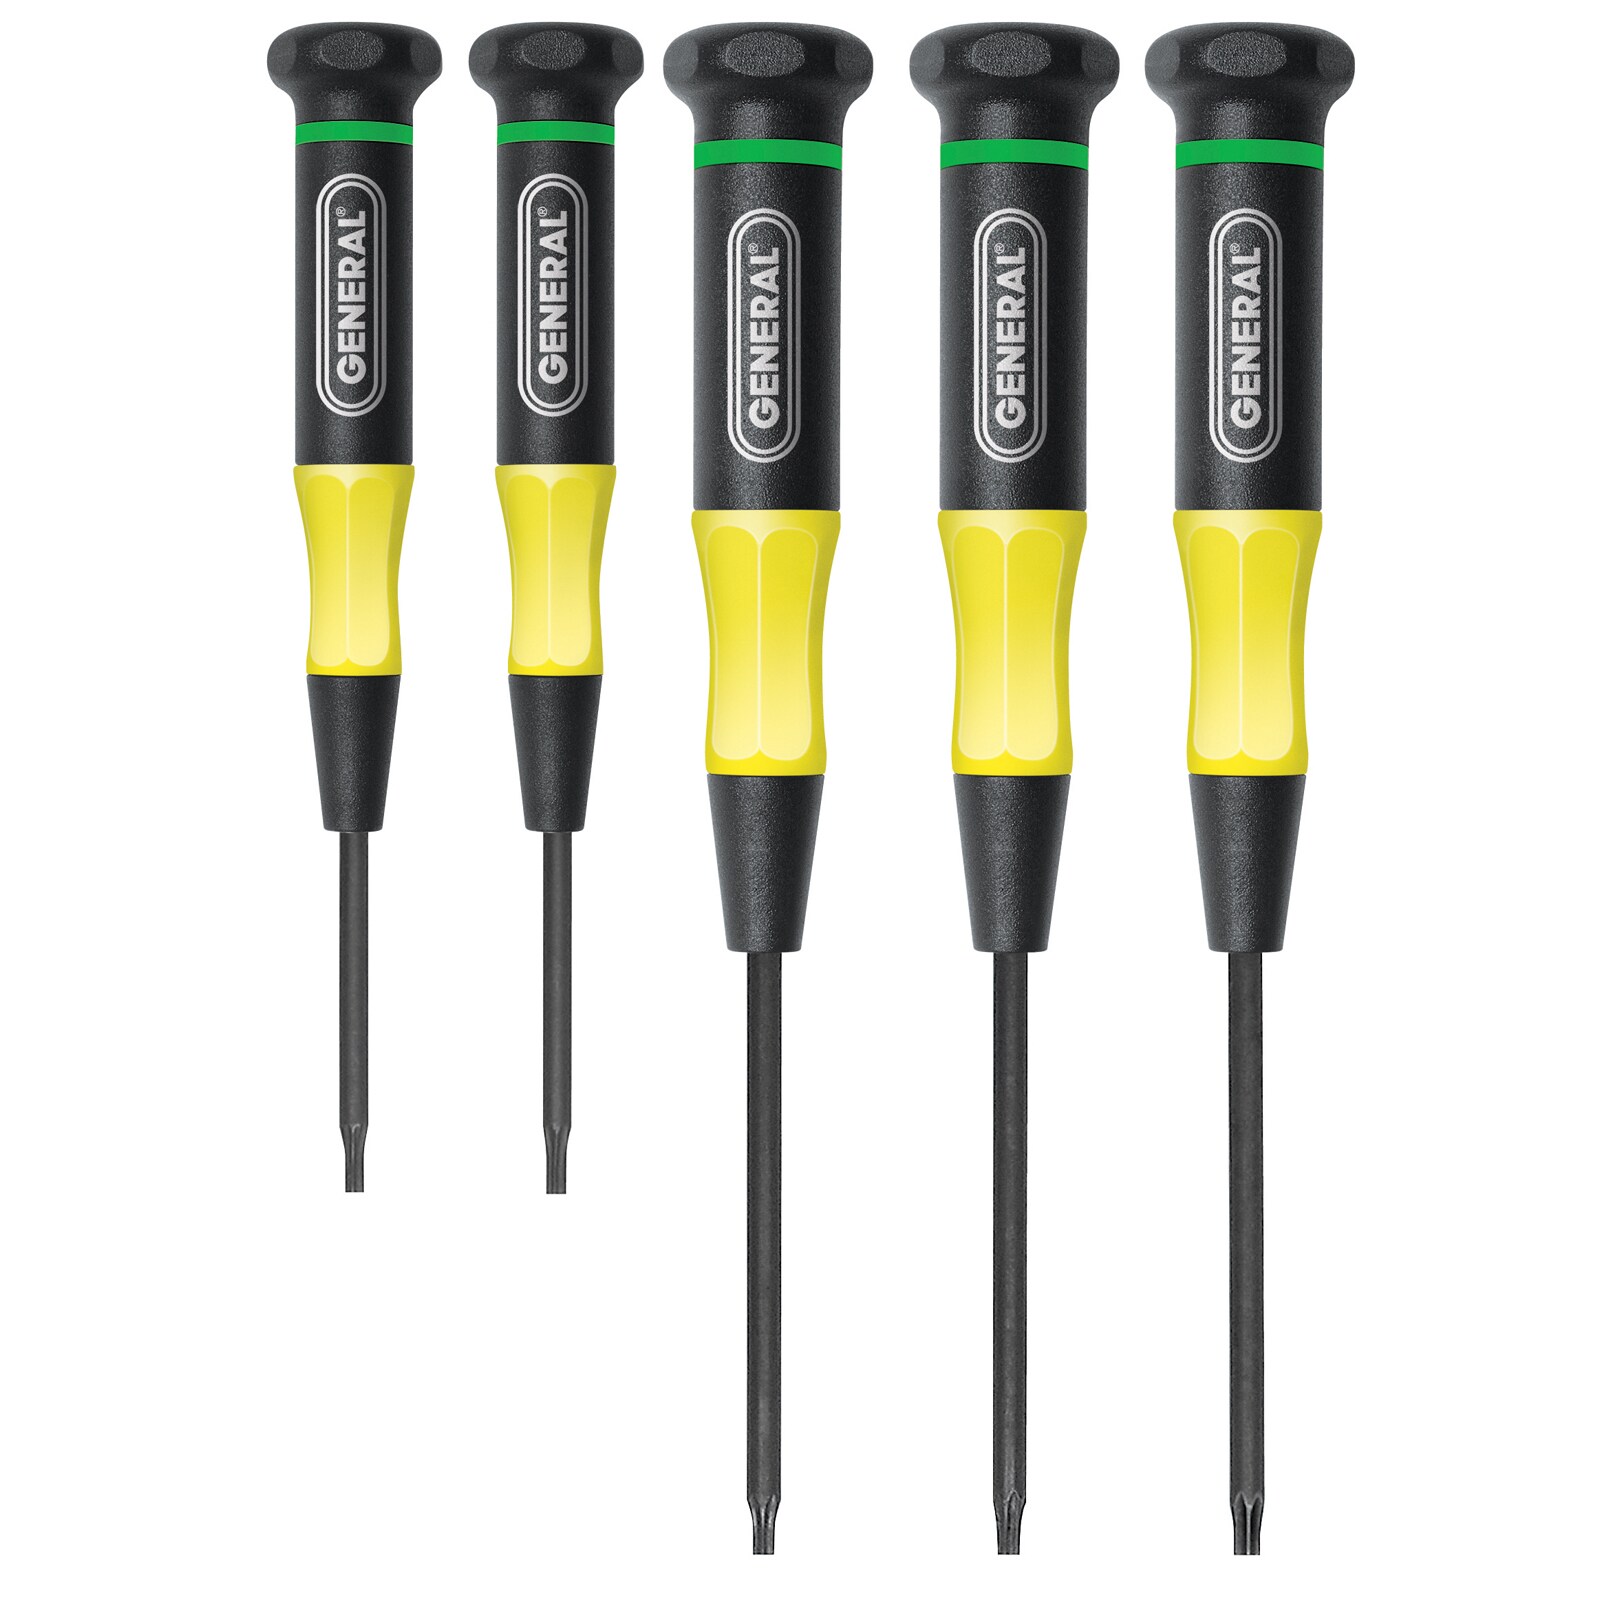 General Tools 711 Precision Ultratech Torx Screwdriver Set, 5-Piece - image 2 of 2